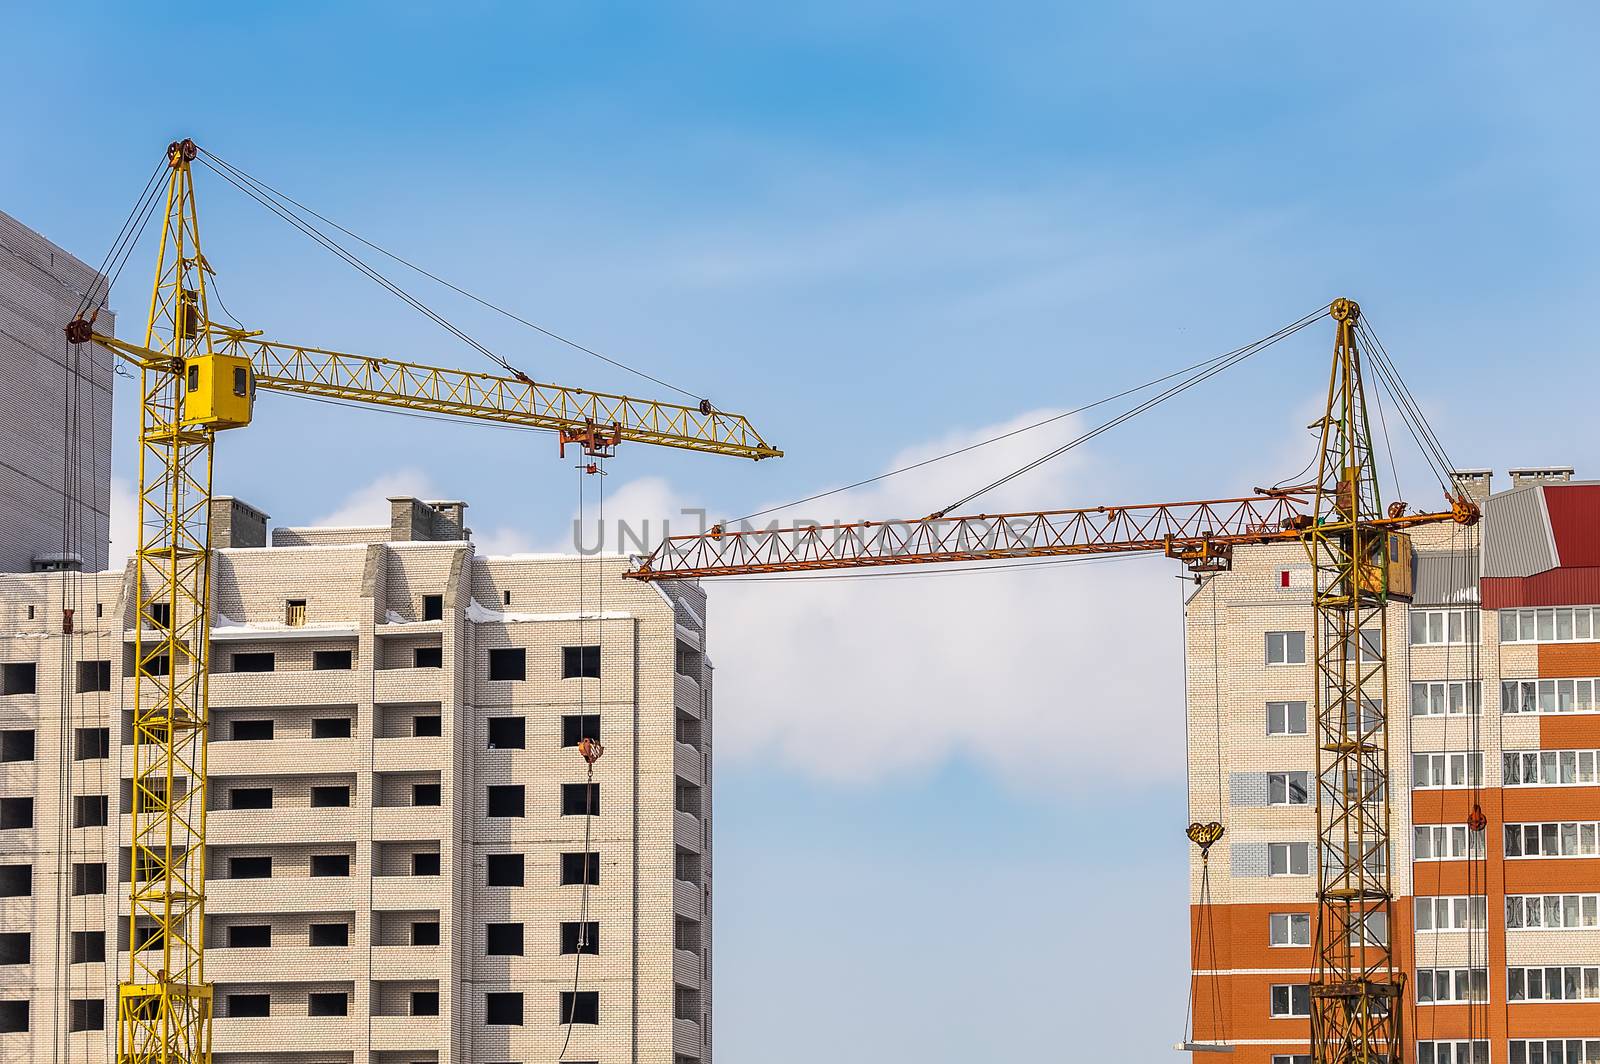 Construction Site with Two Buildings and Cranes by DamantisZ